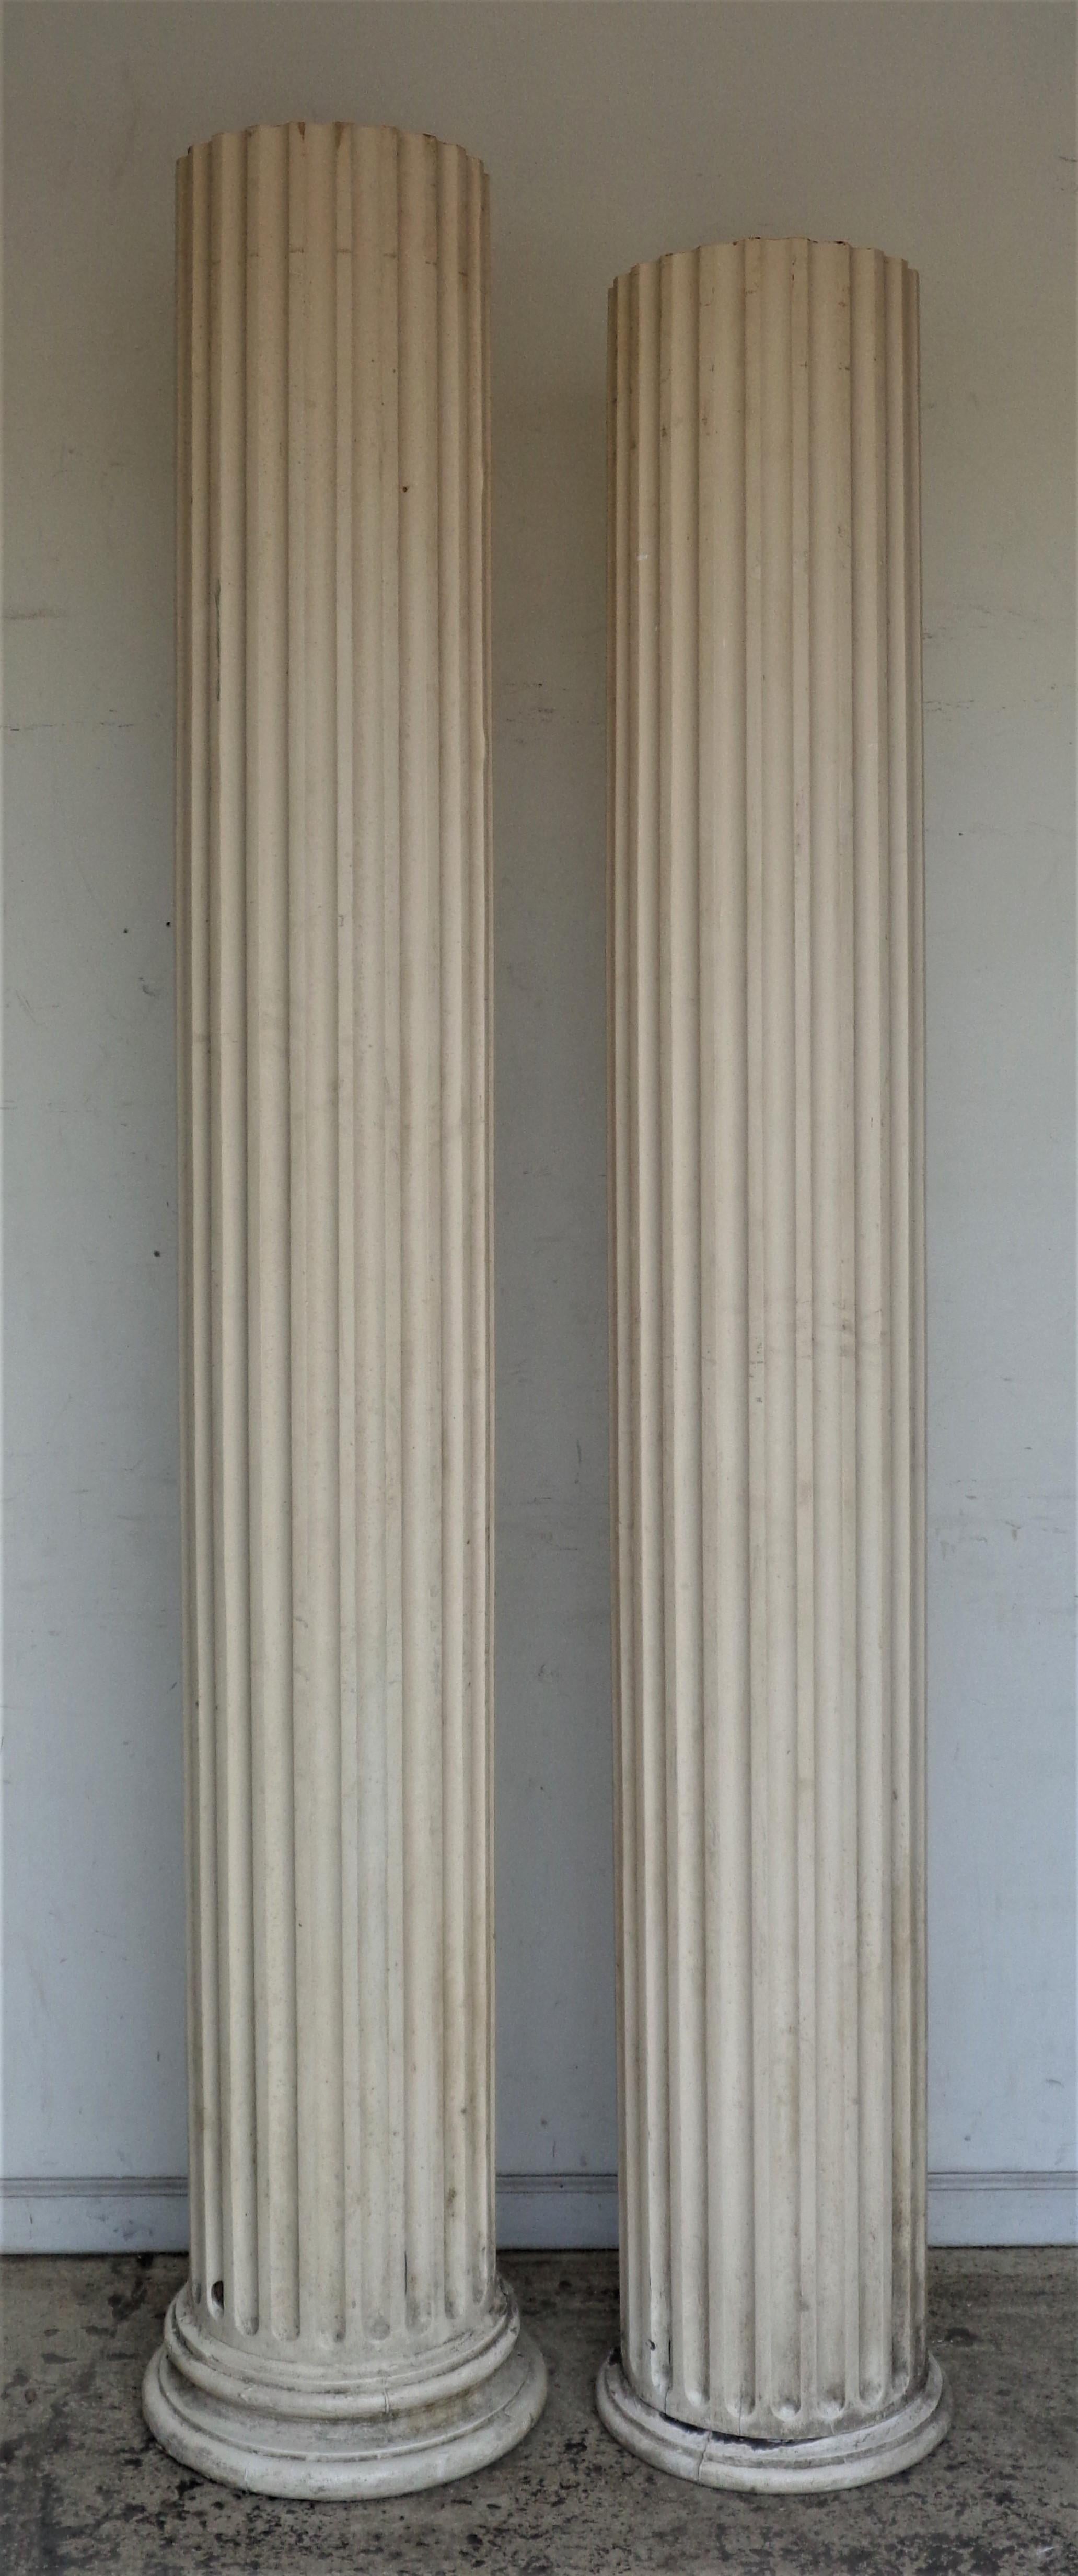 Antique American Architectural Fluted Wood Columns For Sale 2